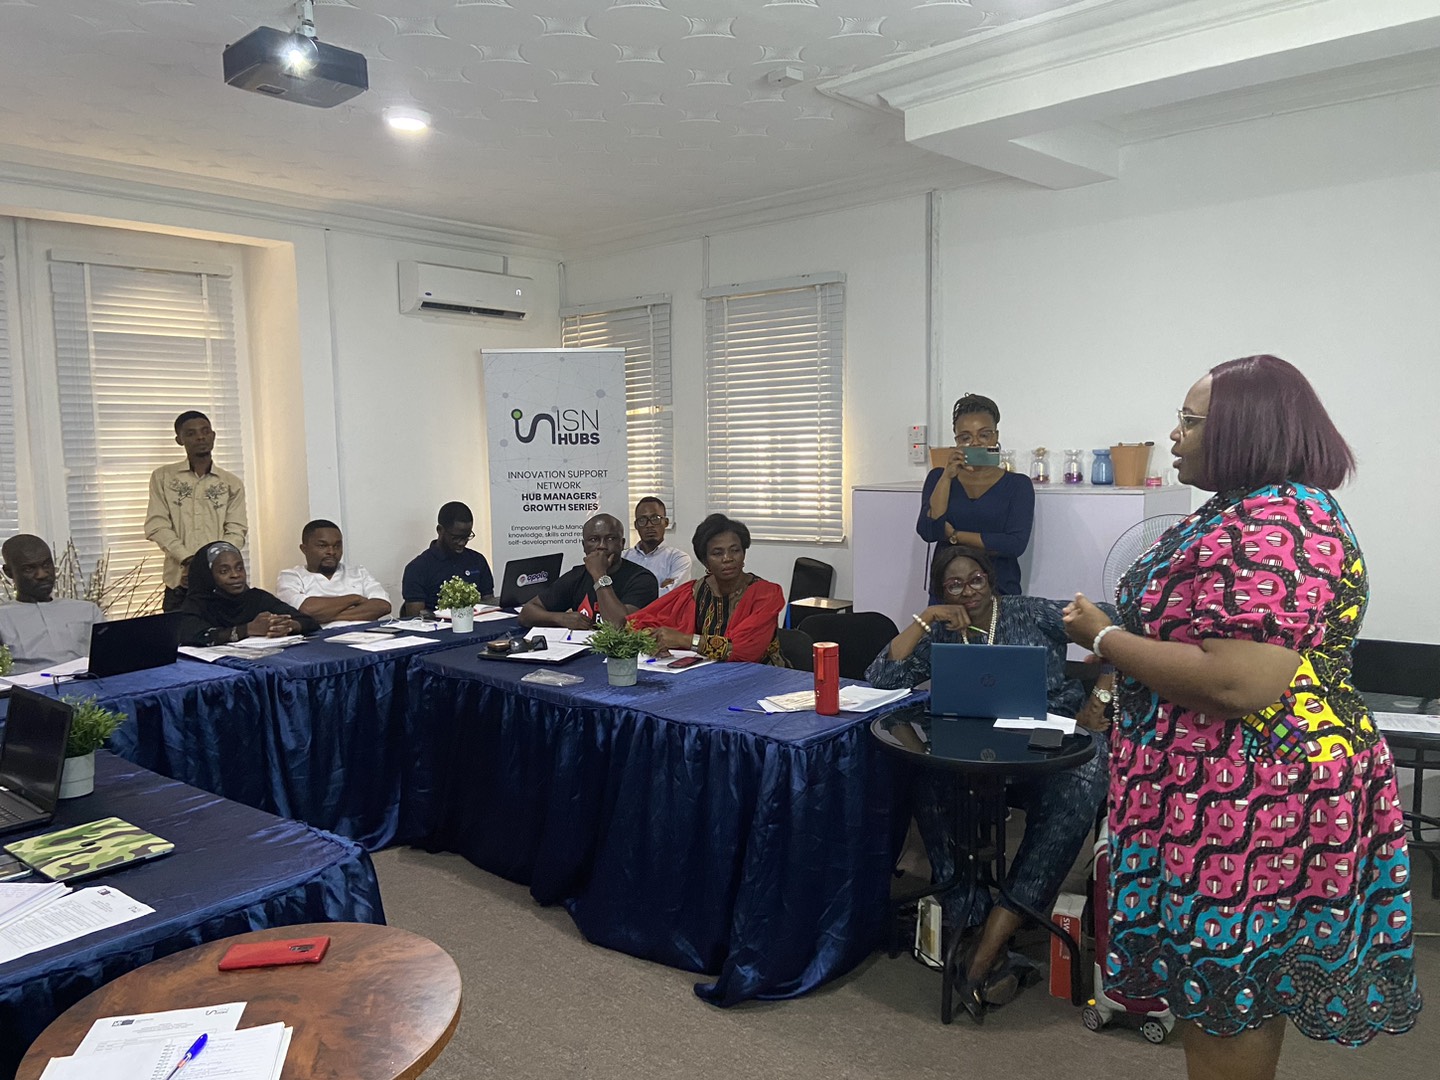 Global Alliance Africa partners with Innovation Support Network to host the inaugural Innovation Canvas training in Nigeria